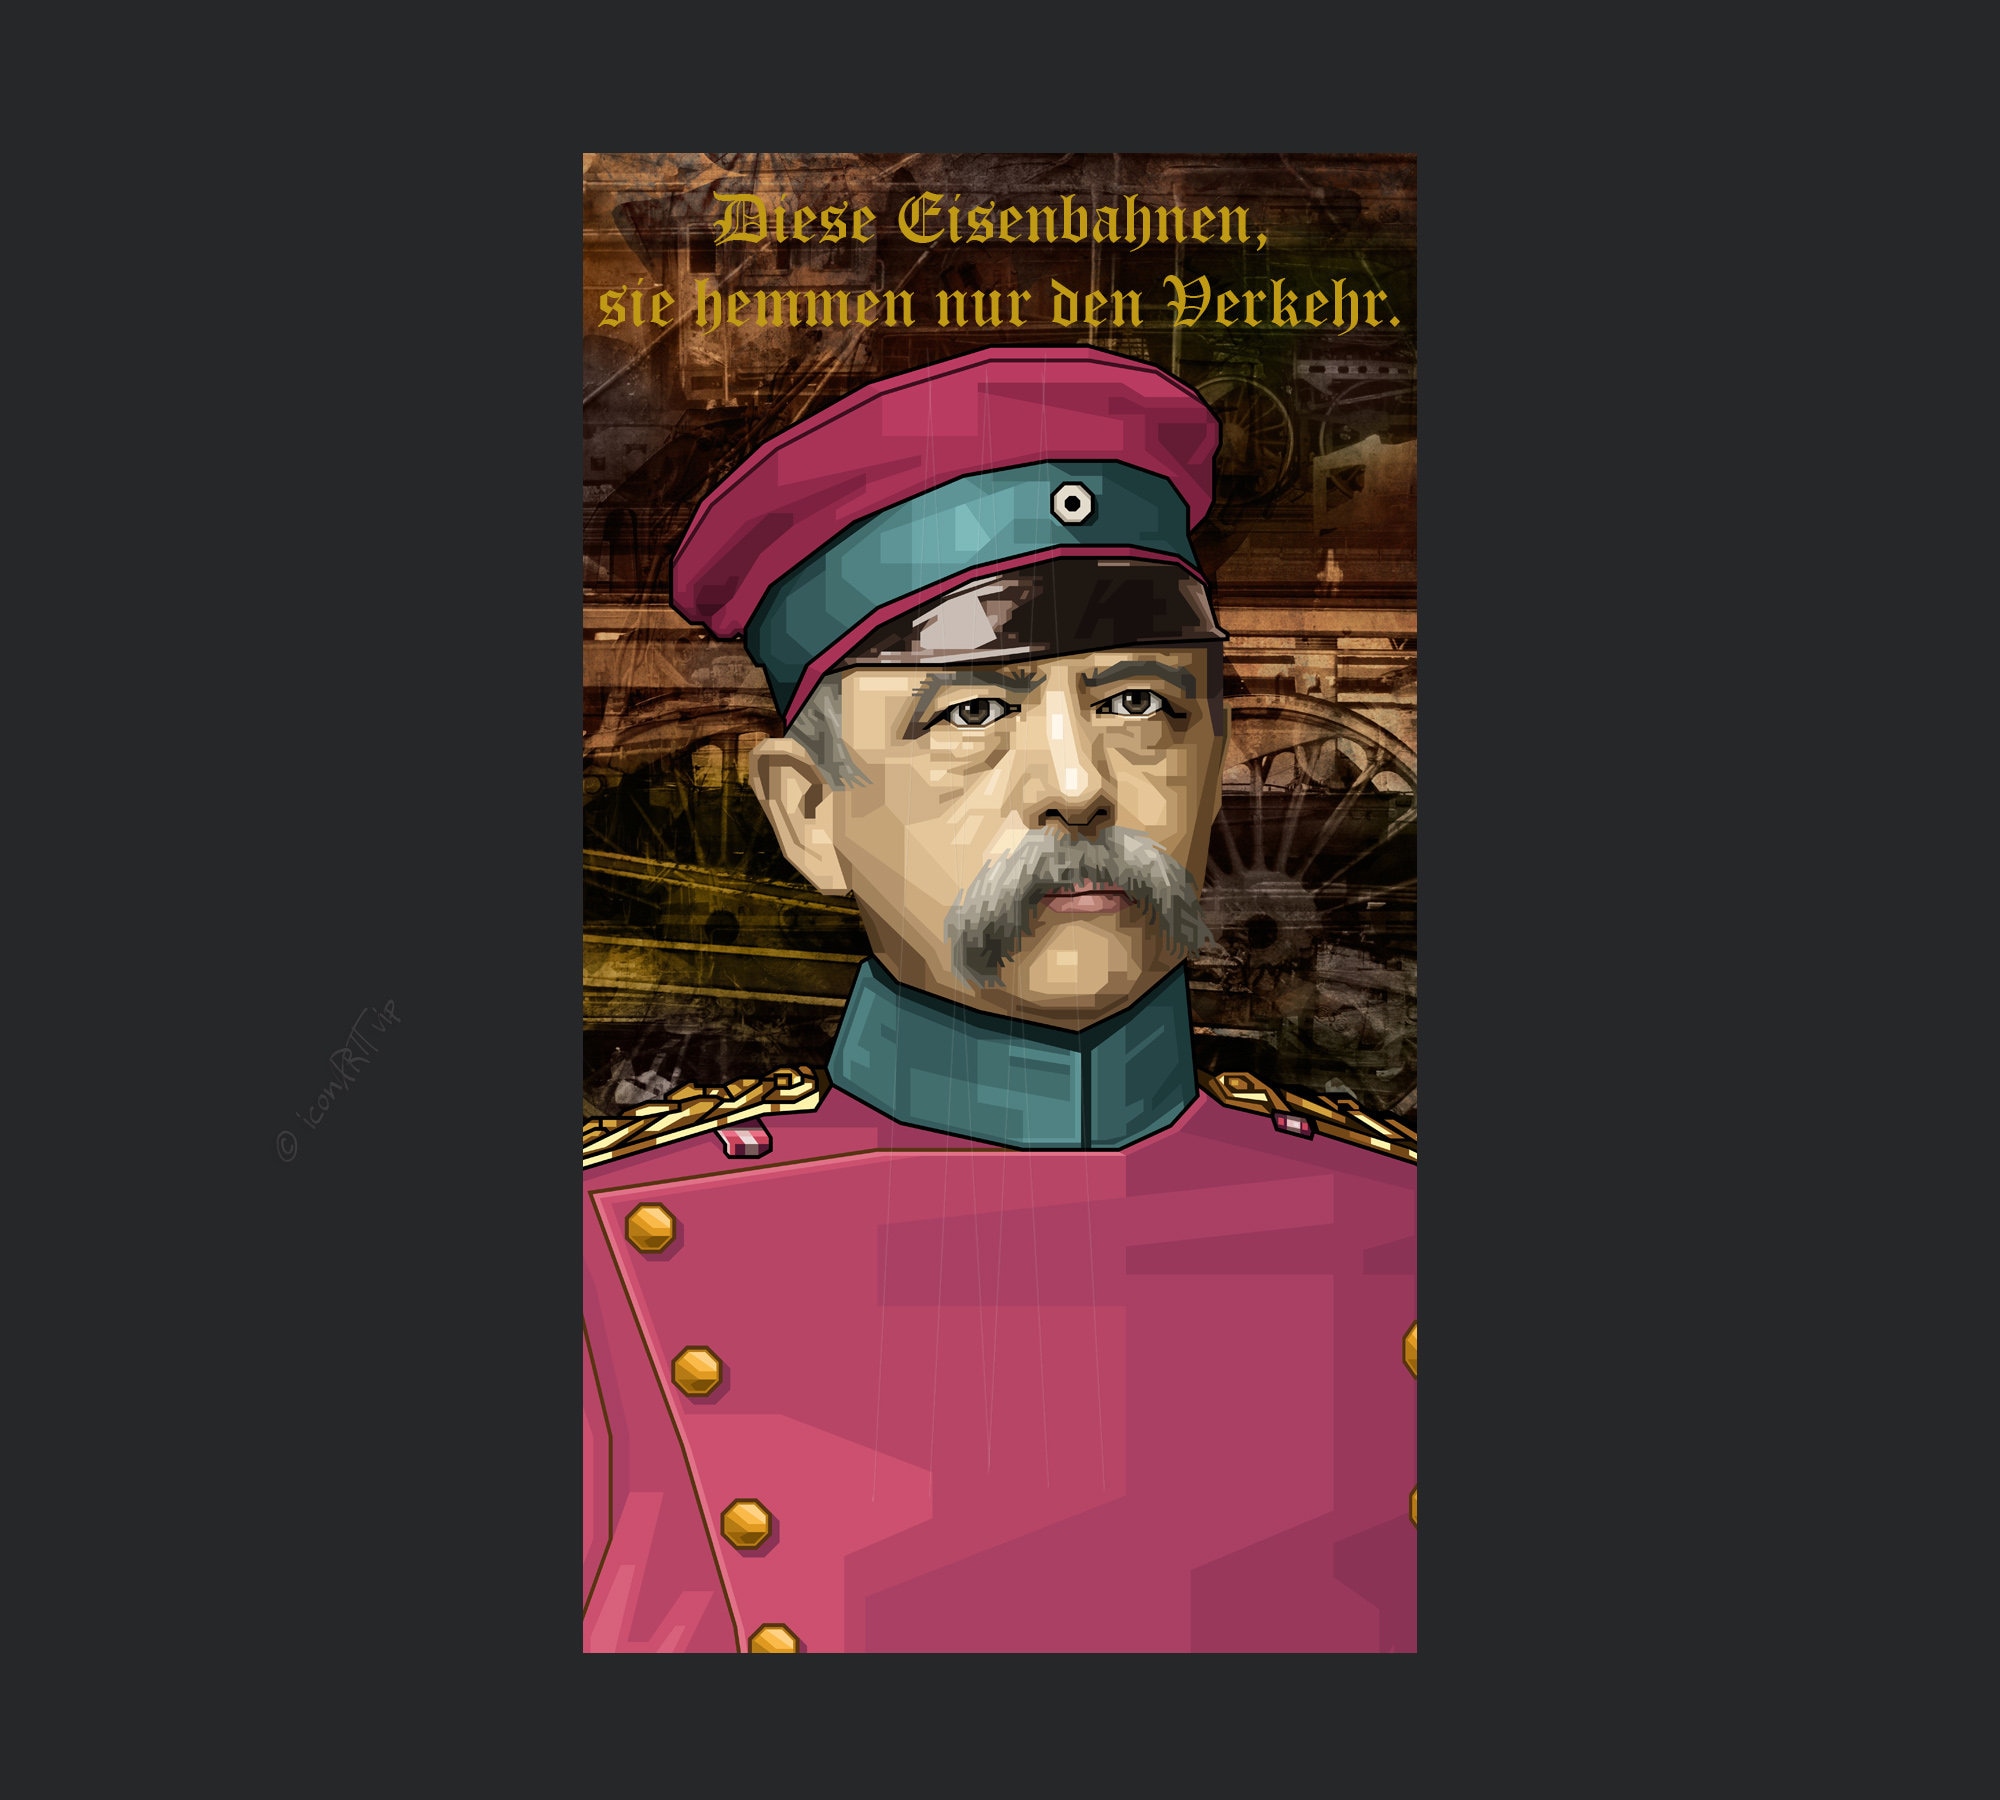 Just received this in my e-mail : r/hoi4